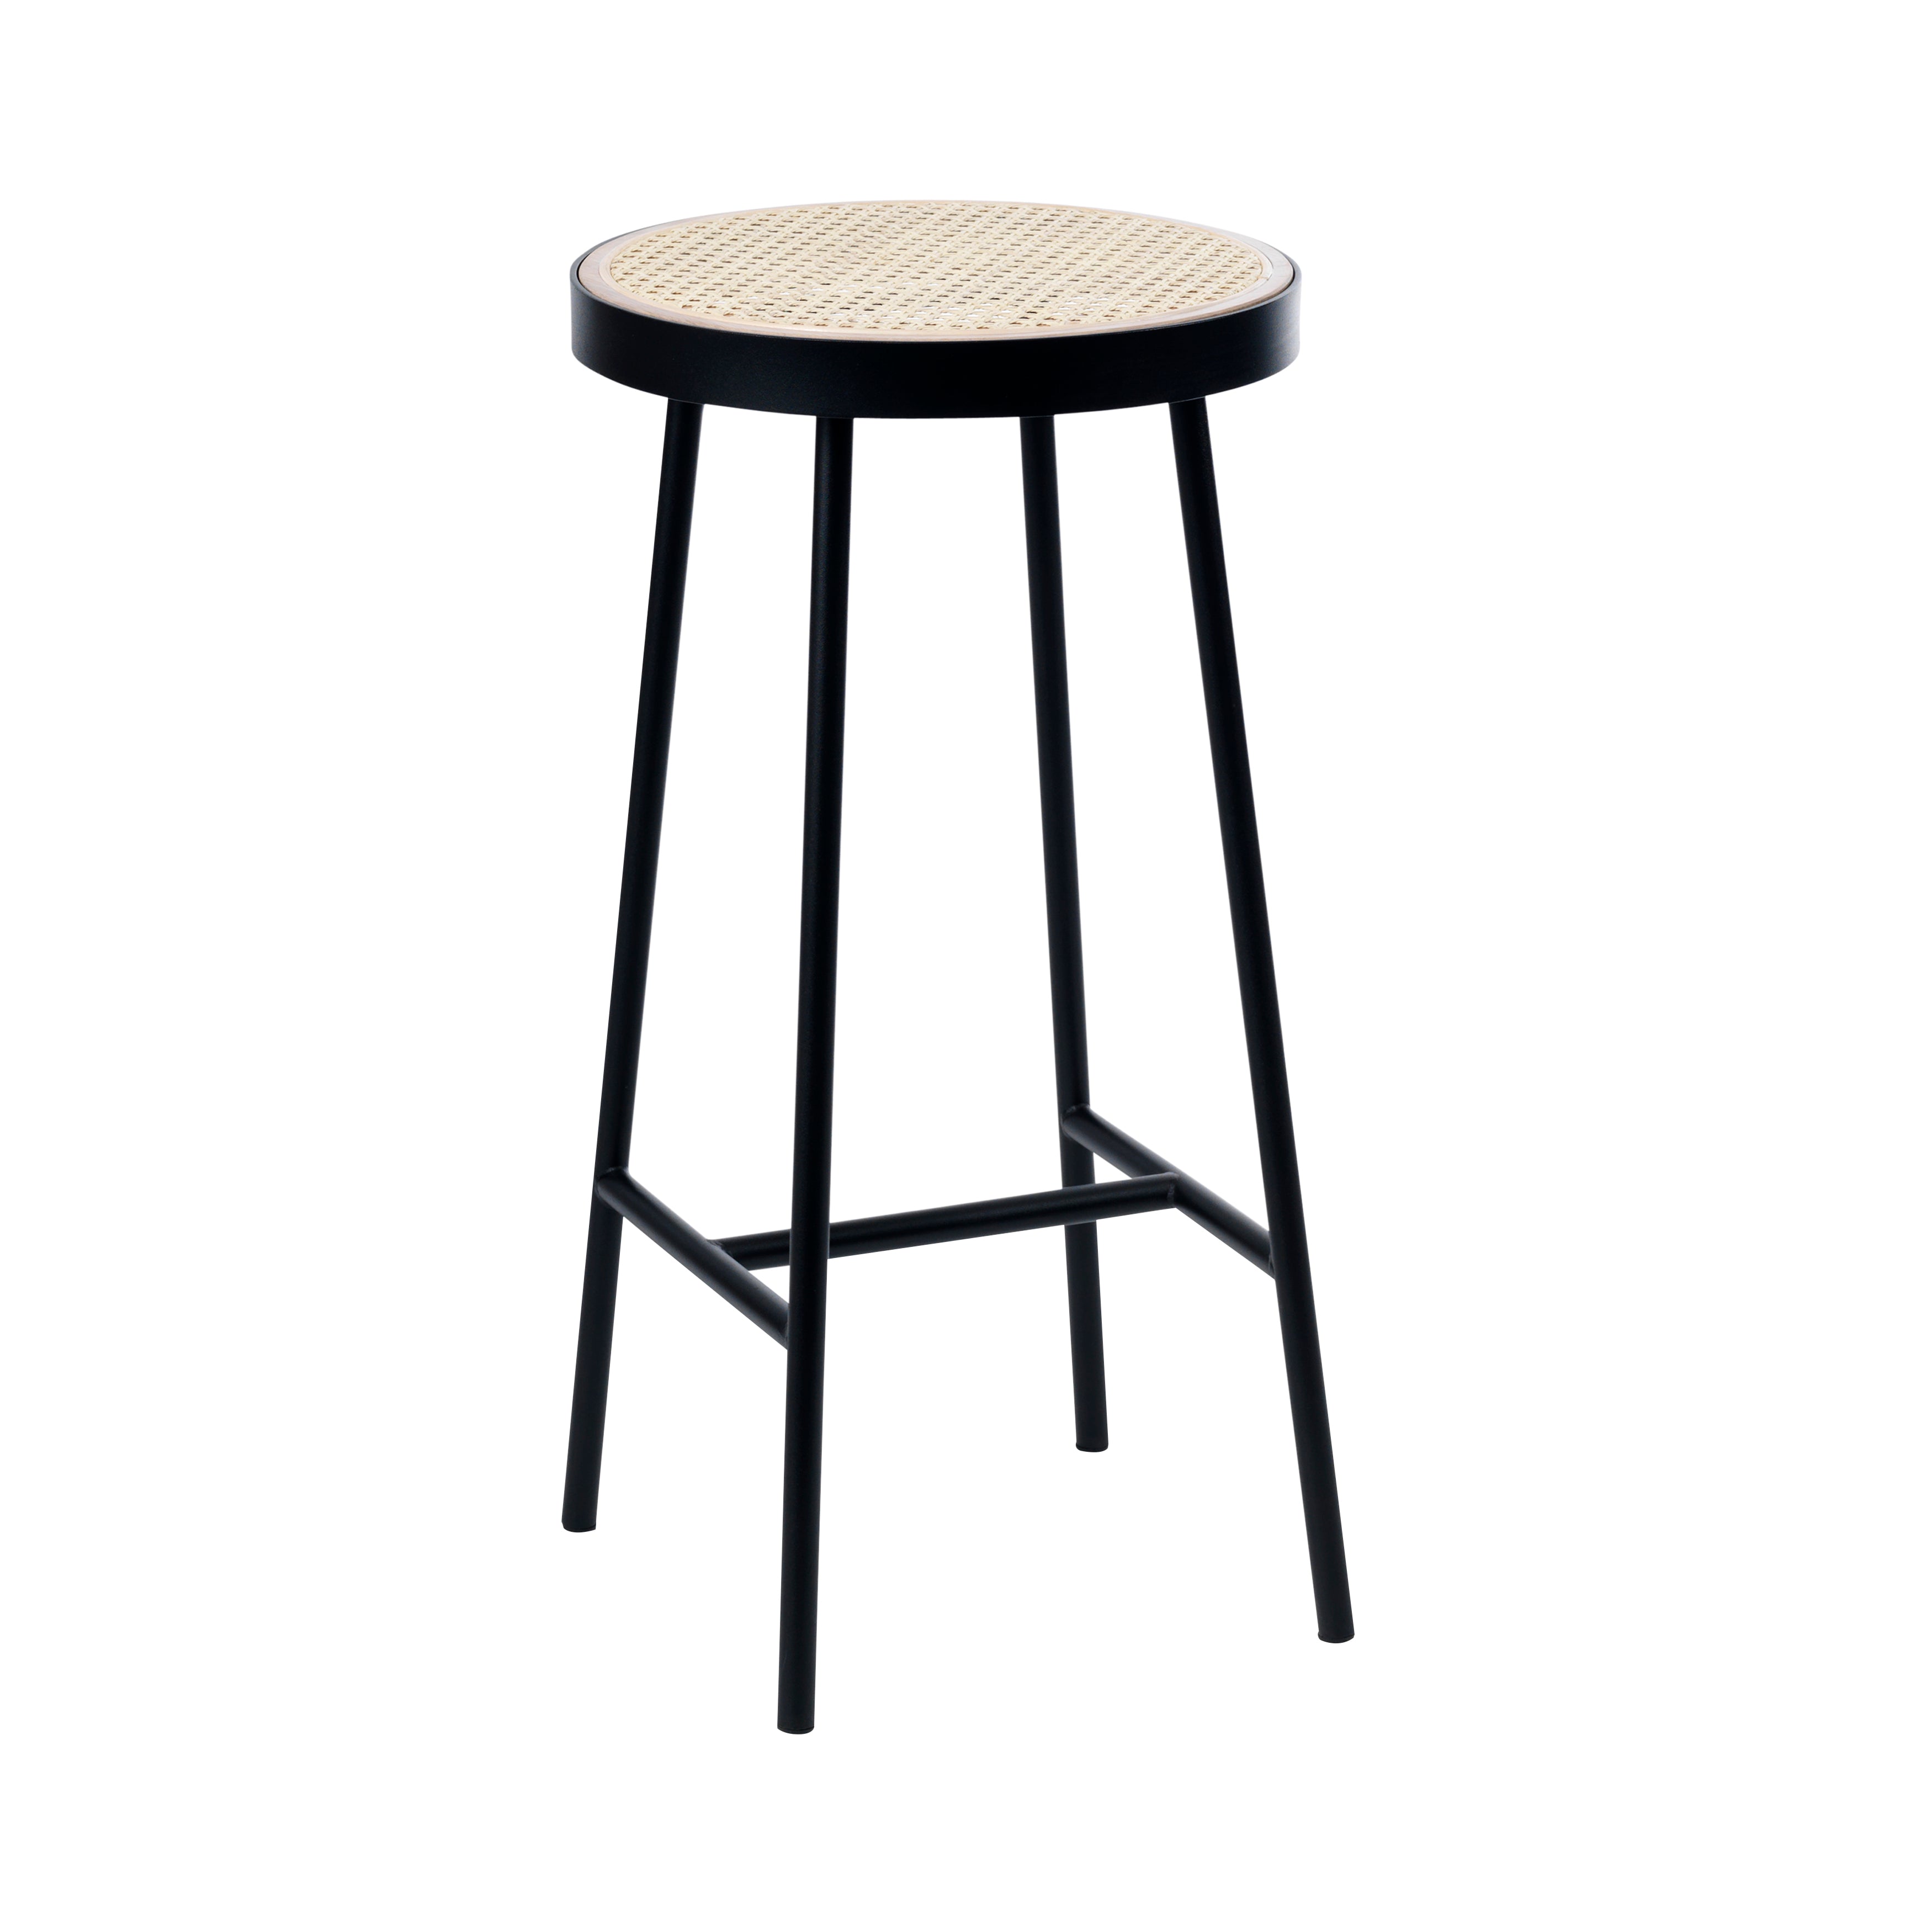 Be My Guest Bar Stool